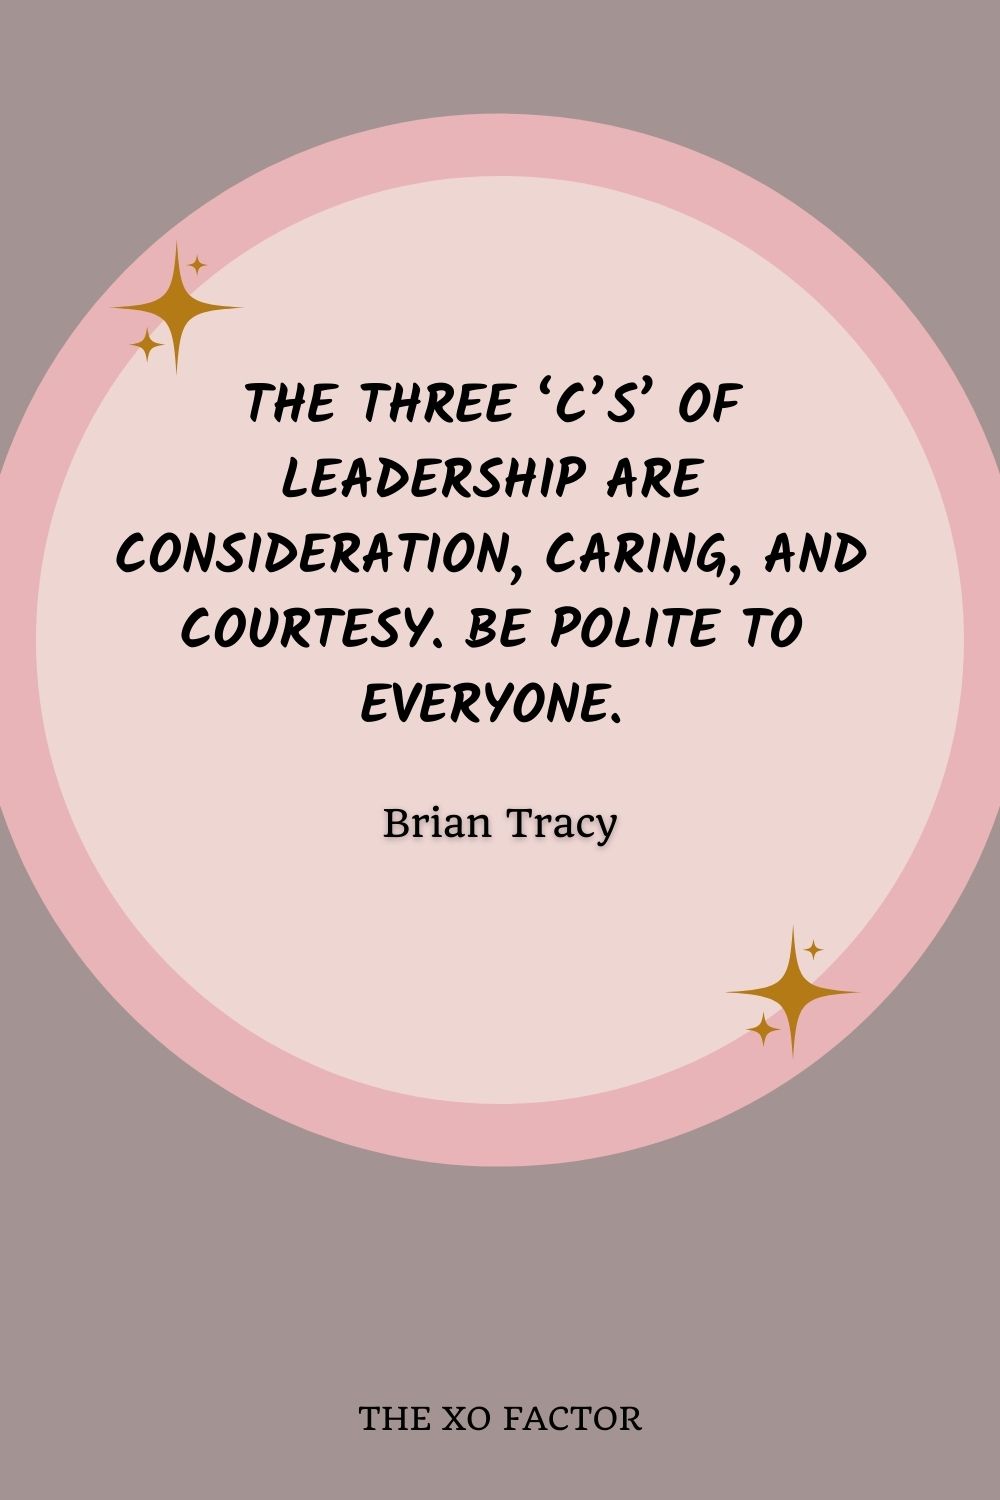 The three ‘C’s’ of leadership are consideration, caring, and courtesy. Be polite to everyone.” – Brian Tracy